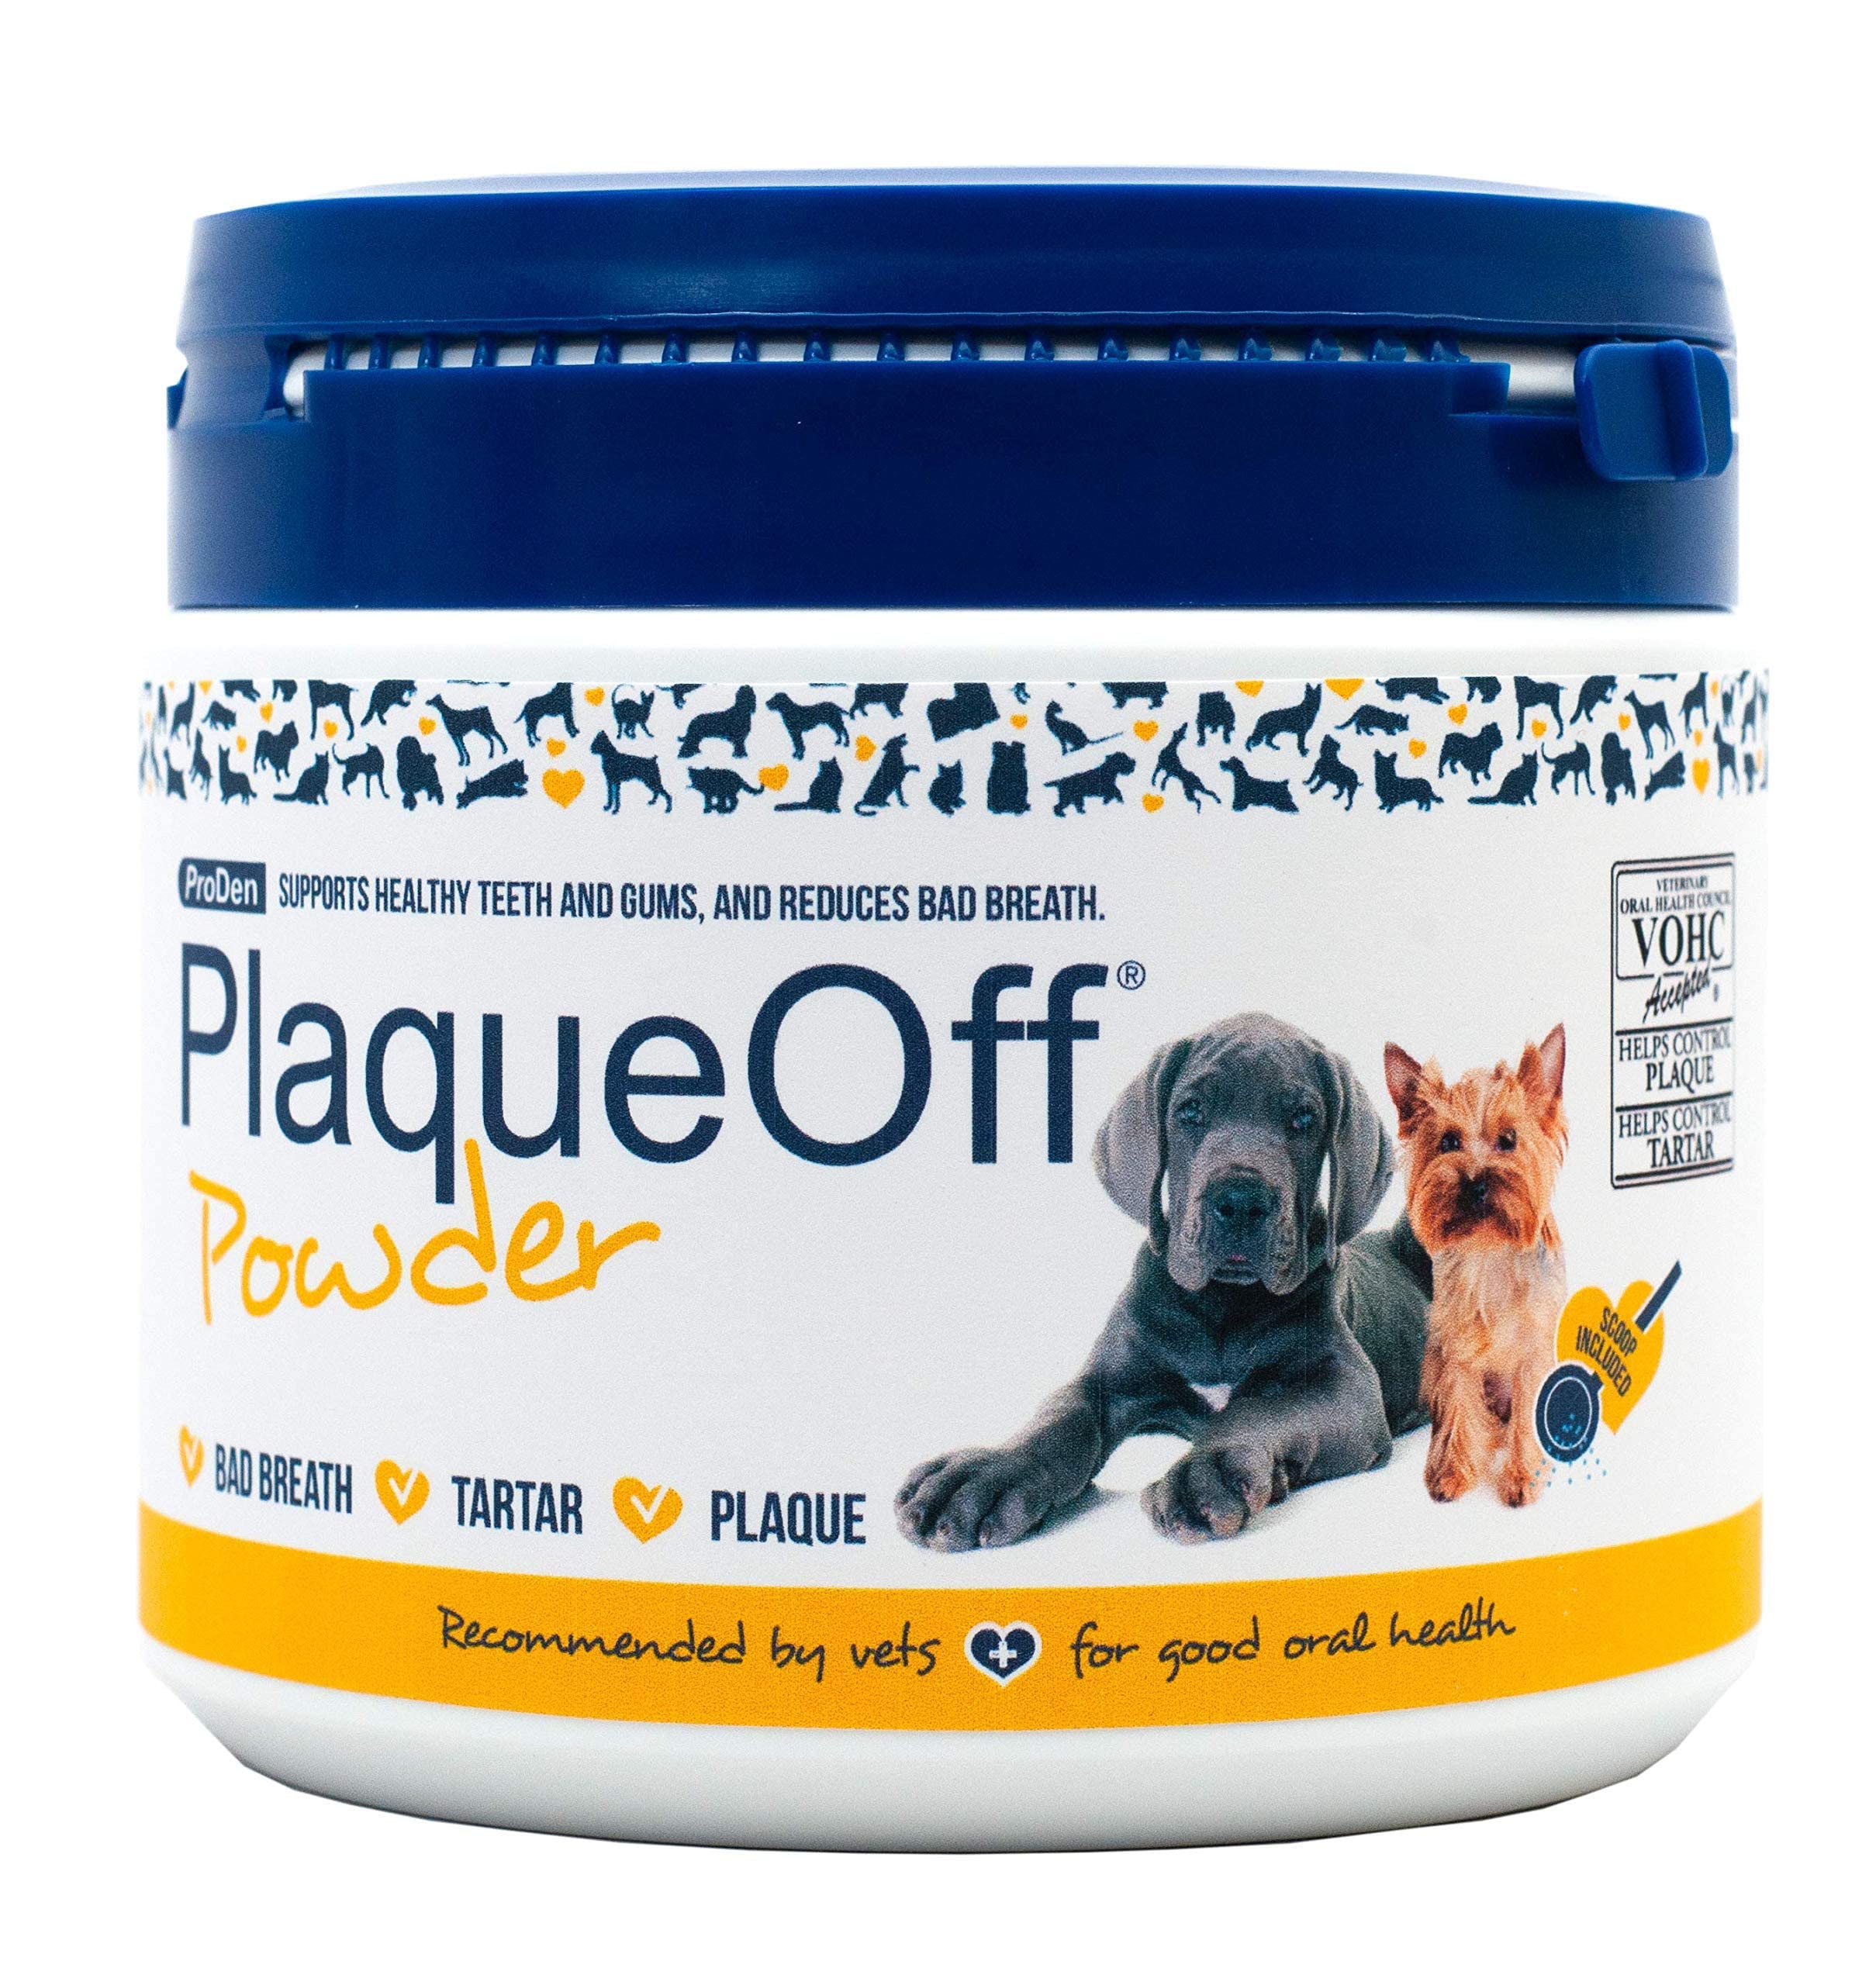 ProDen PlaqueOff Powder - Supports Normal Healthy Teeth gums and Breath Odor in Pets - 420 g